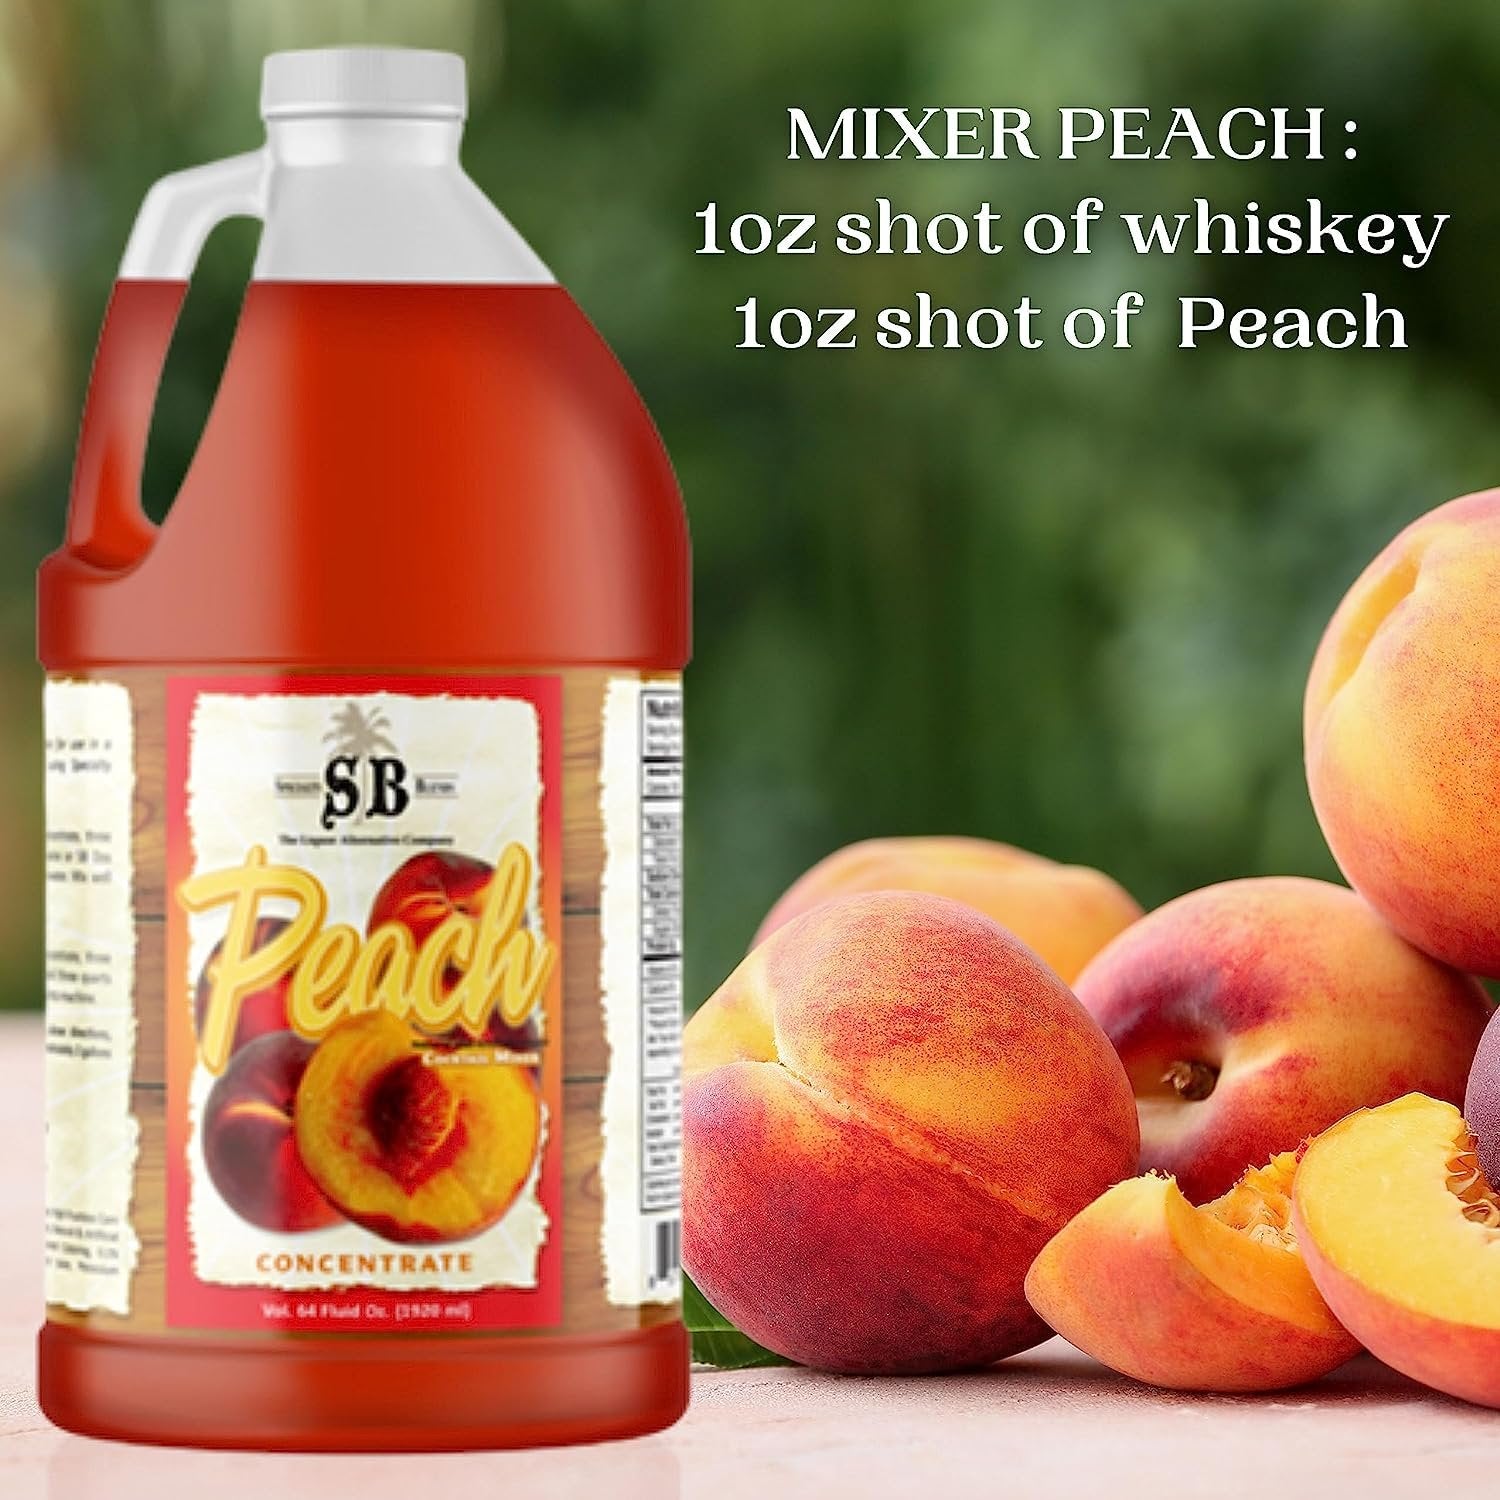 Specialty Blends Peach Flavored Syrup Cocktail Mixer Concentrate, Made with Organic Peach Flavor Syrups For Drinks, 1/2 Gallon (Pack of 1) - with Bonus Worldwide Nutrition Multi Purpose Key Chain